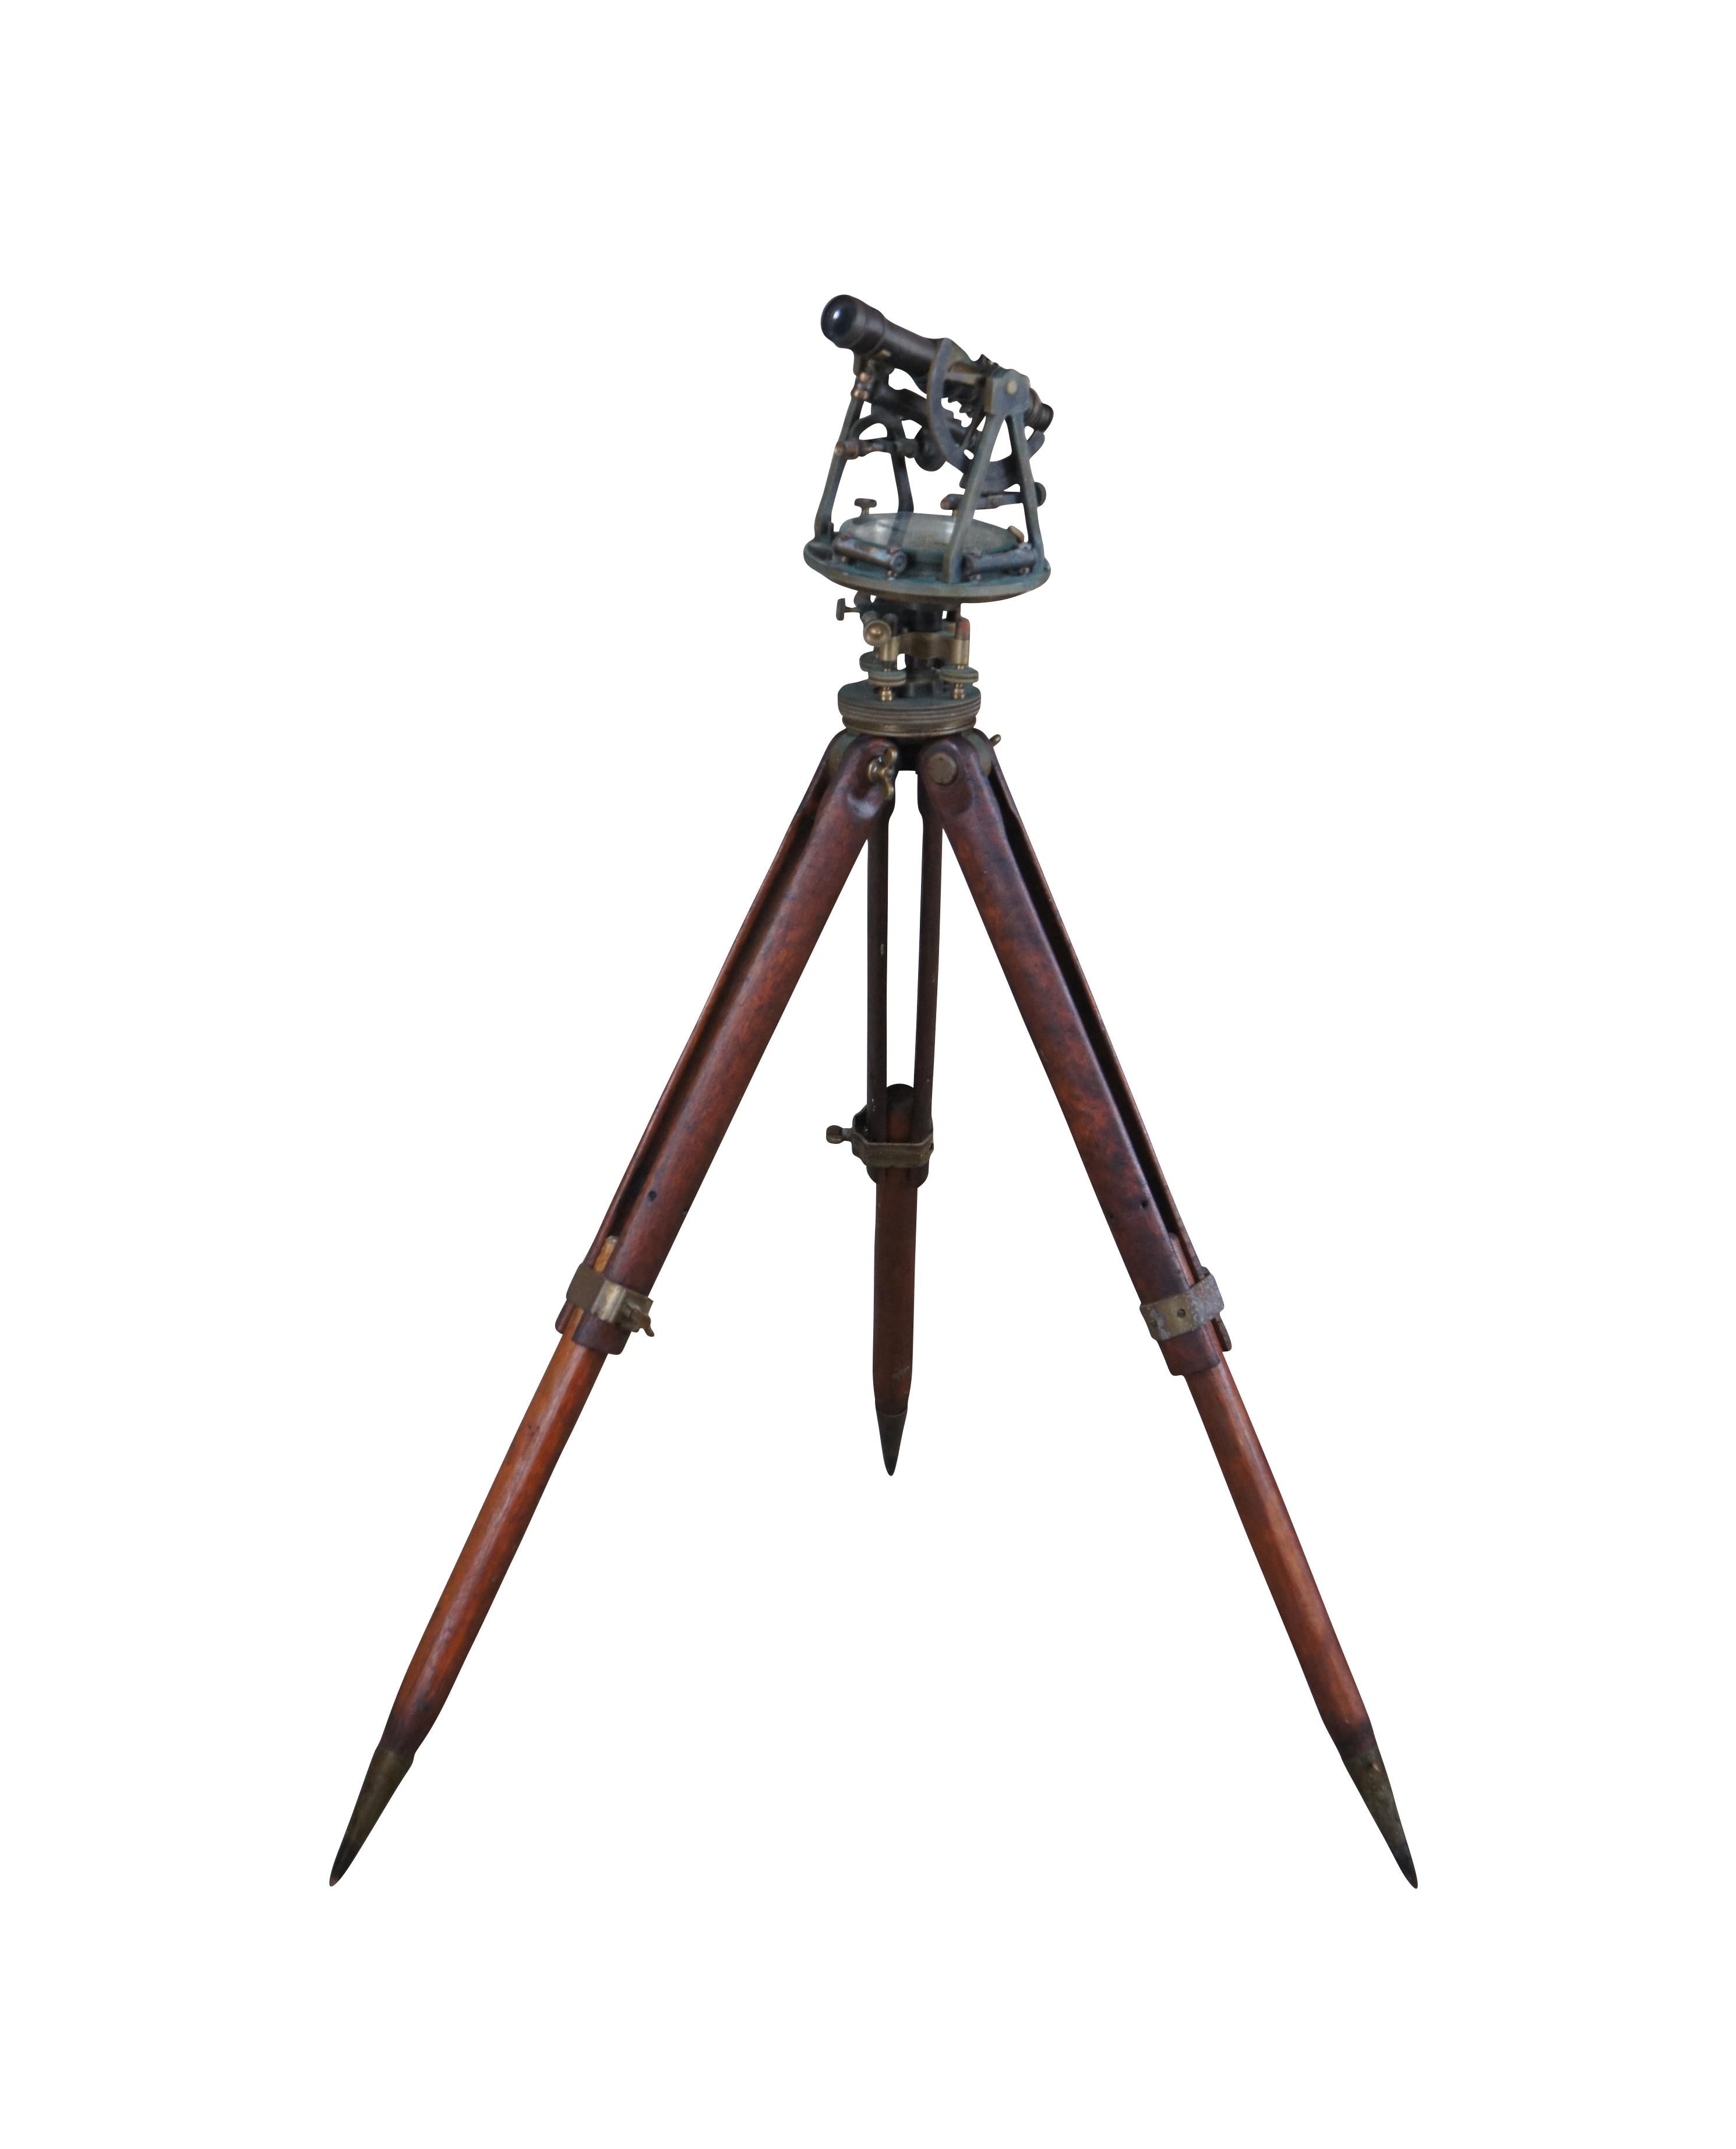 Antique surveyor’s level transit signed W & L.E Gurley, Troy NY. Made from oak, brass and glass with telescoping stand. 

Closed - 34